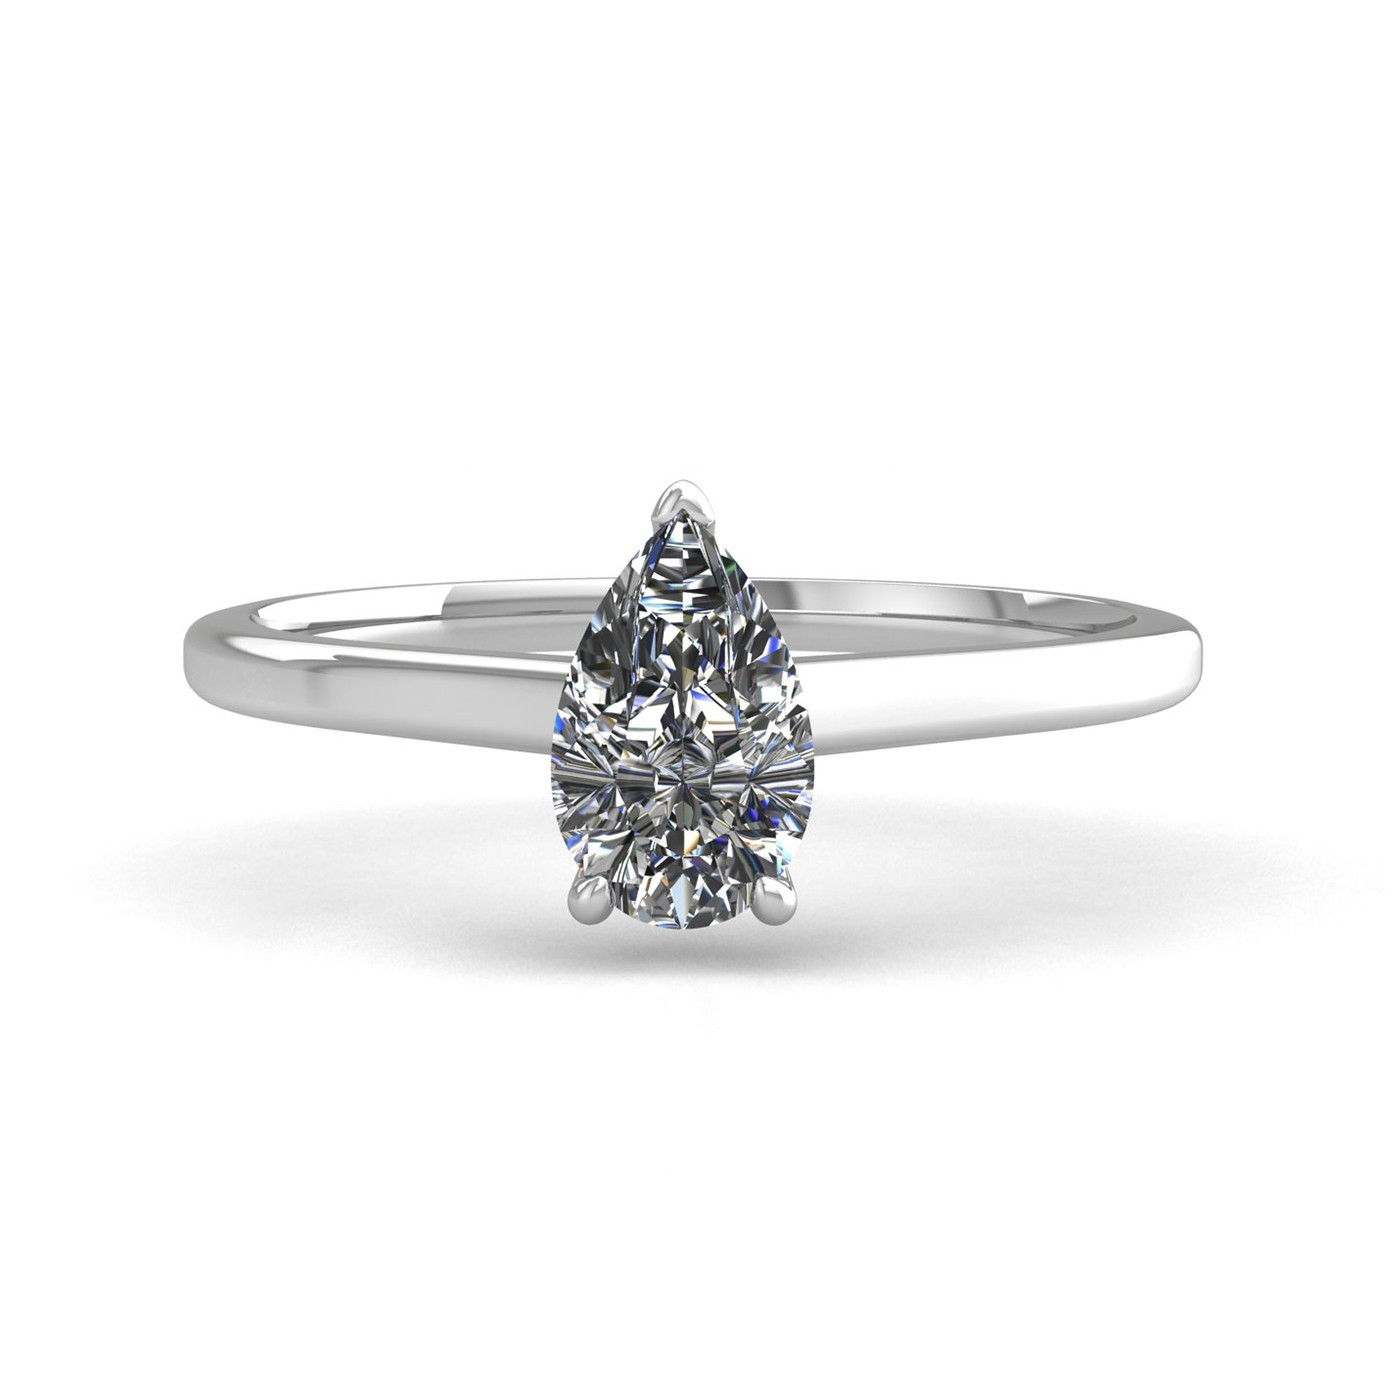 18k white gold  0,30 ct 3 prongs solitaire pear cut diamond engagement ring with whisper thin band Photos & images